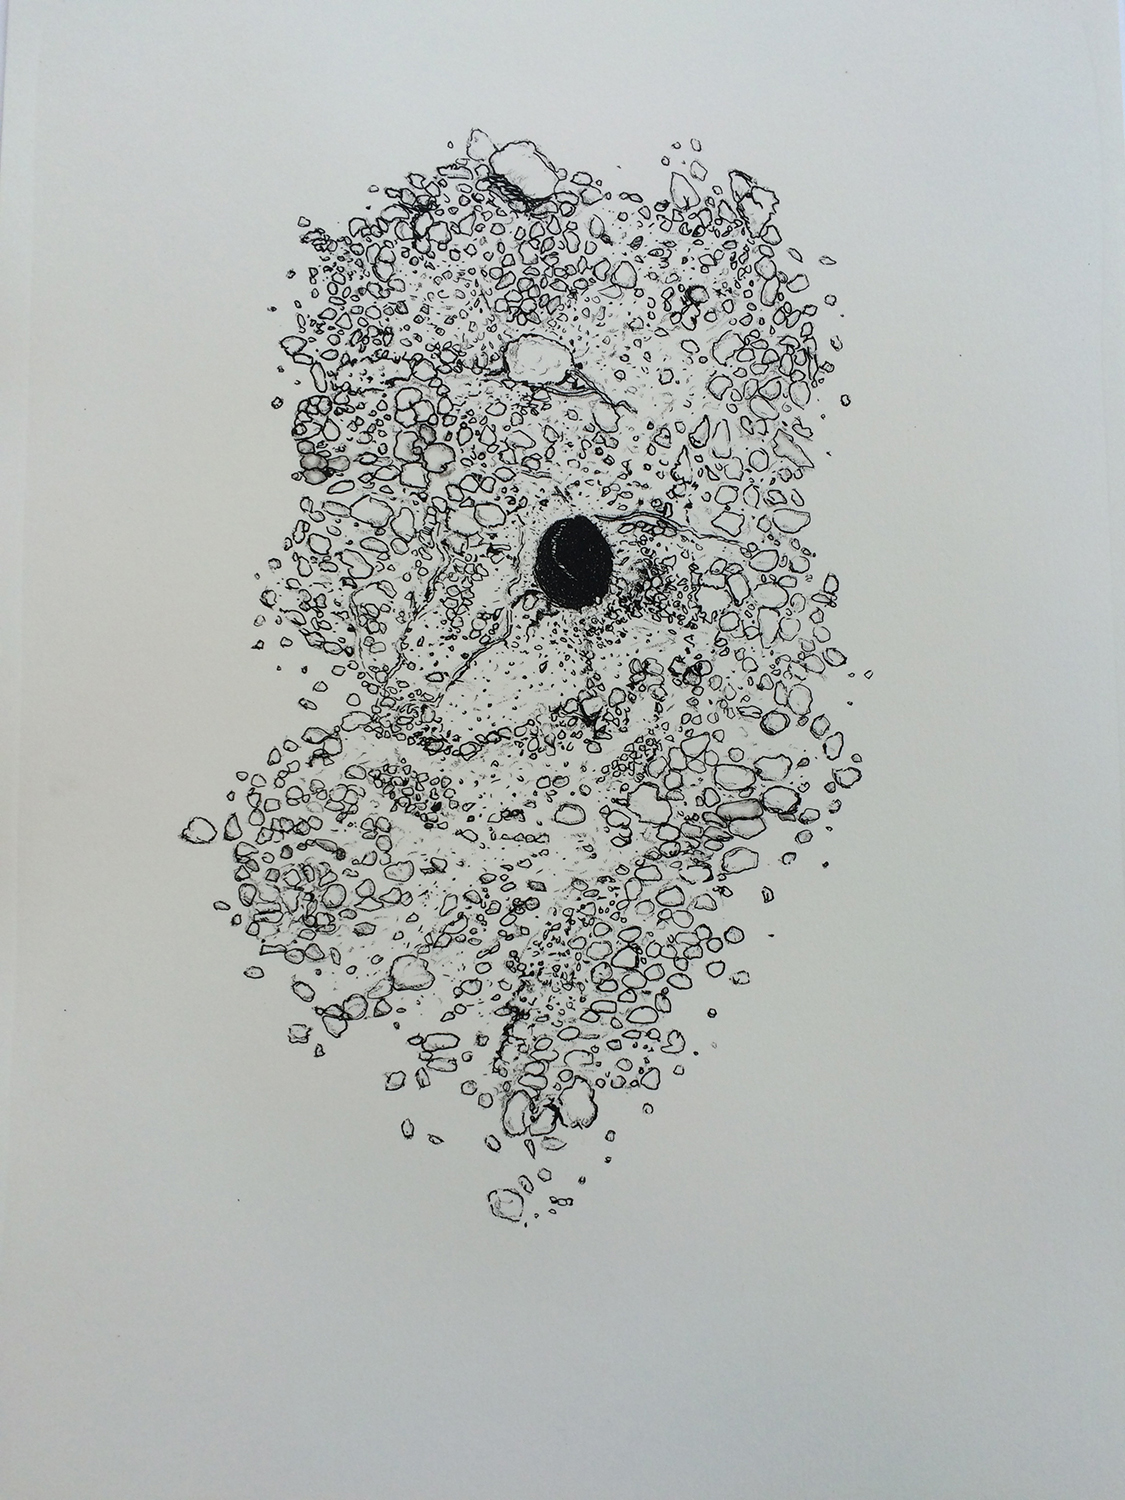 Morag Colquhoun and Lisa Wilkens, solitary bee, 2016, edition of 10 stone lithograph prints on Southbank paper, 28 x 38cm